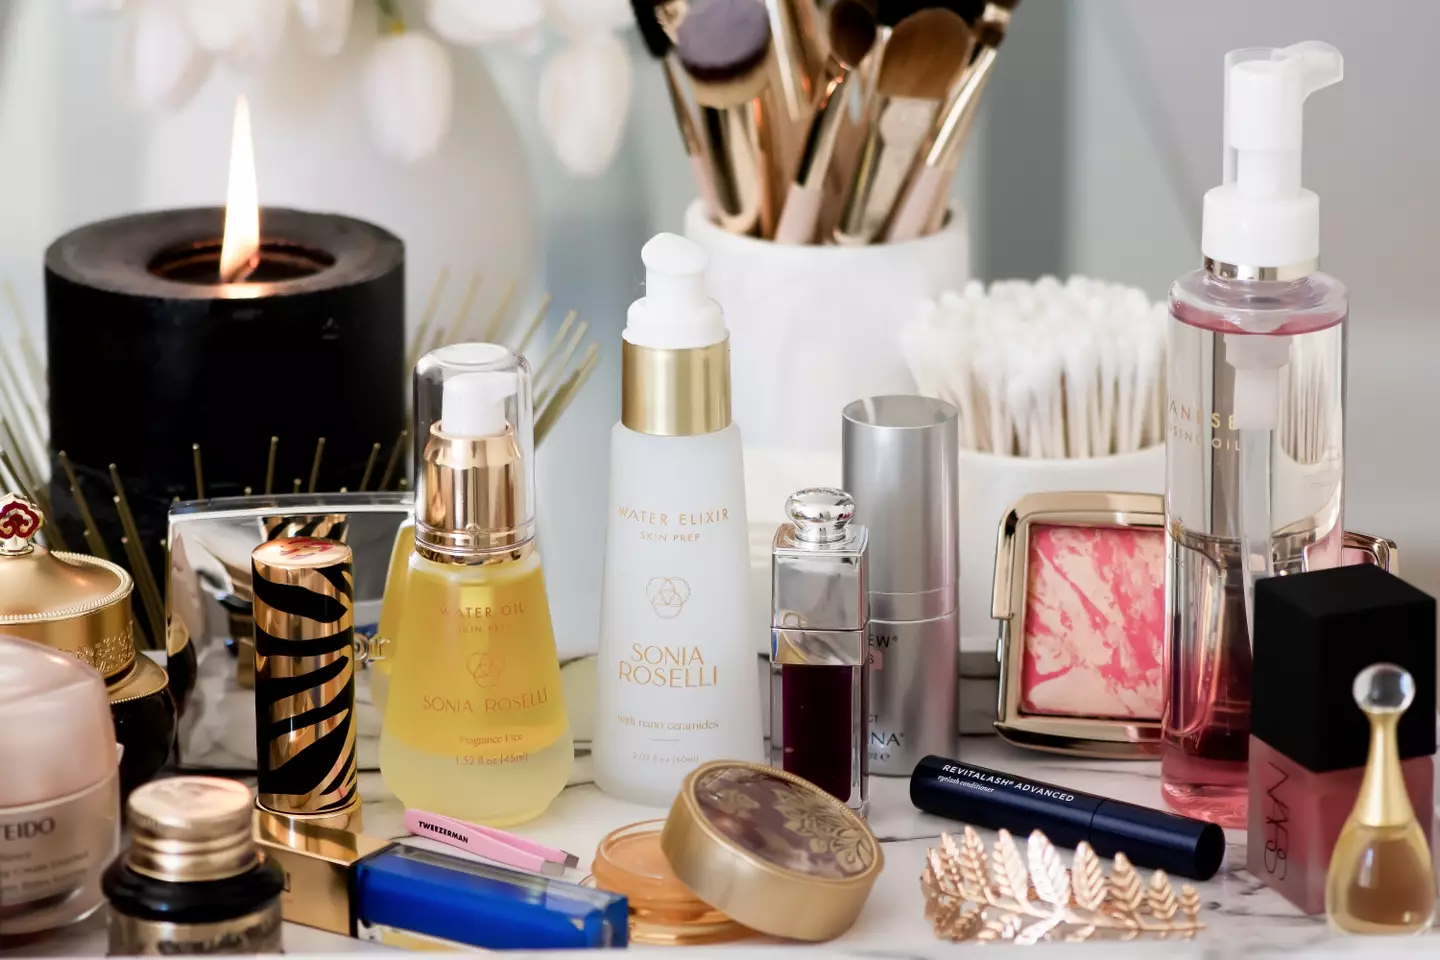 Experts say wearing makeup to sleep isn't good for your skin. (